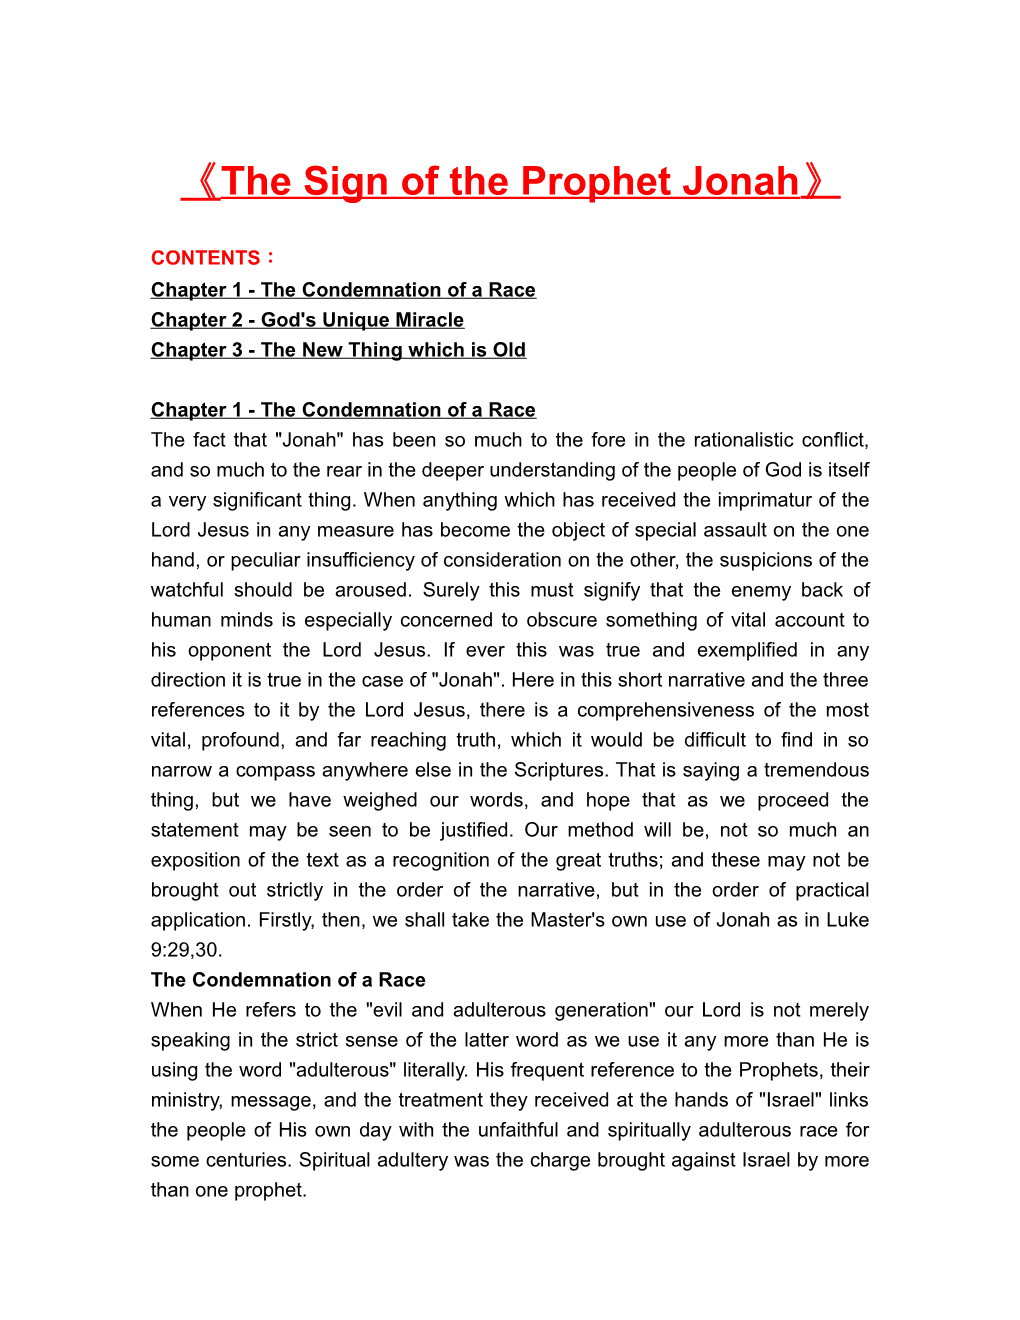 The Sign of the Prophet Jonah